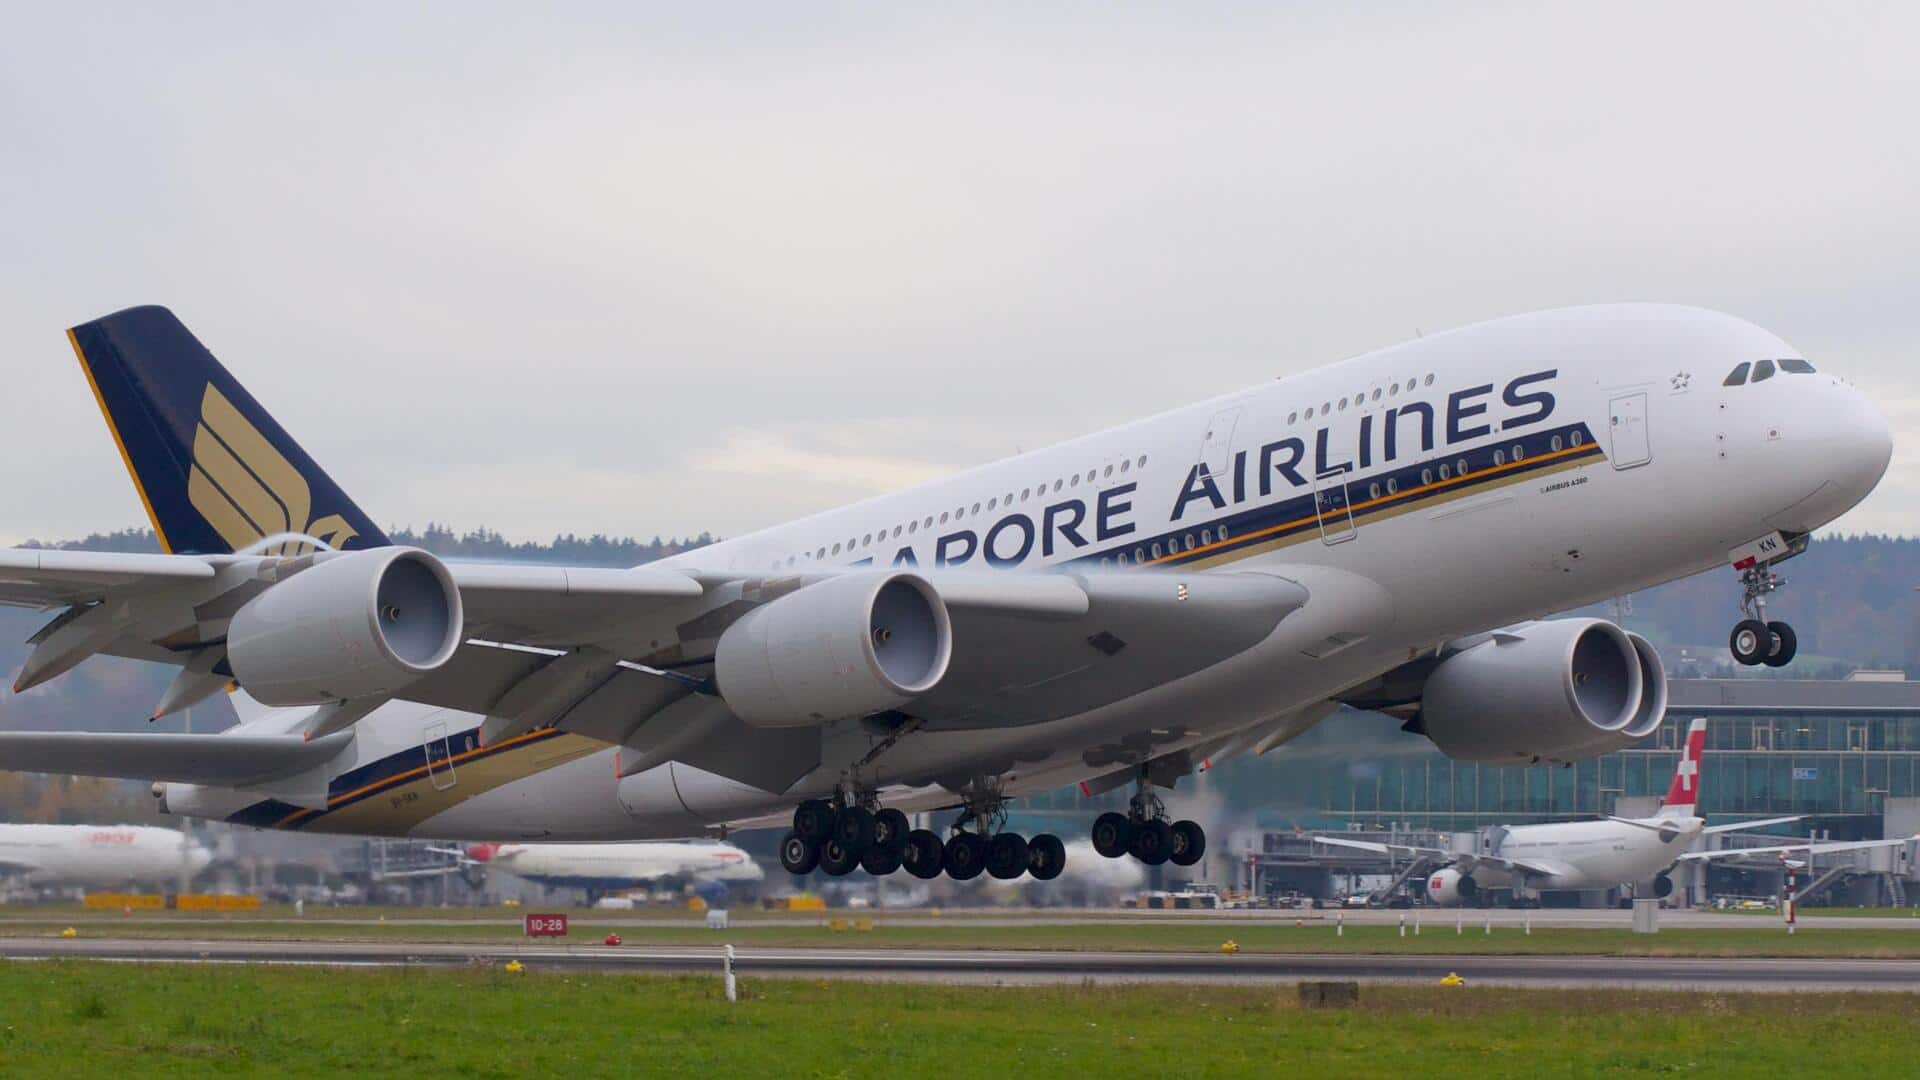 Singapore Airlines to give staff 8-month salary as bonus